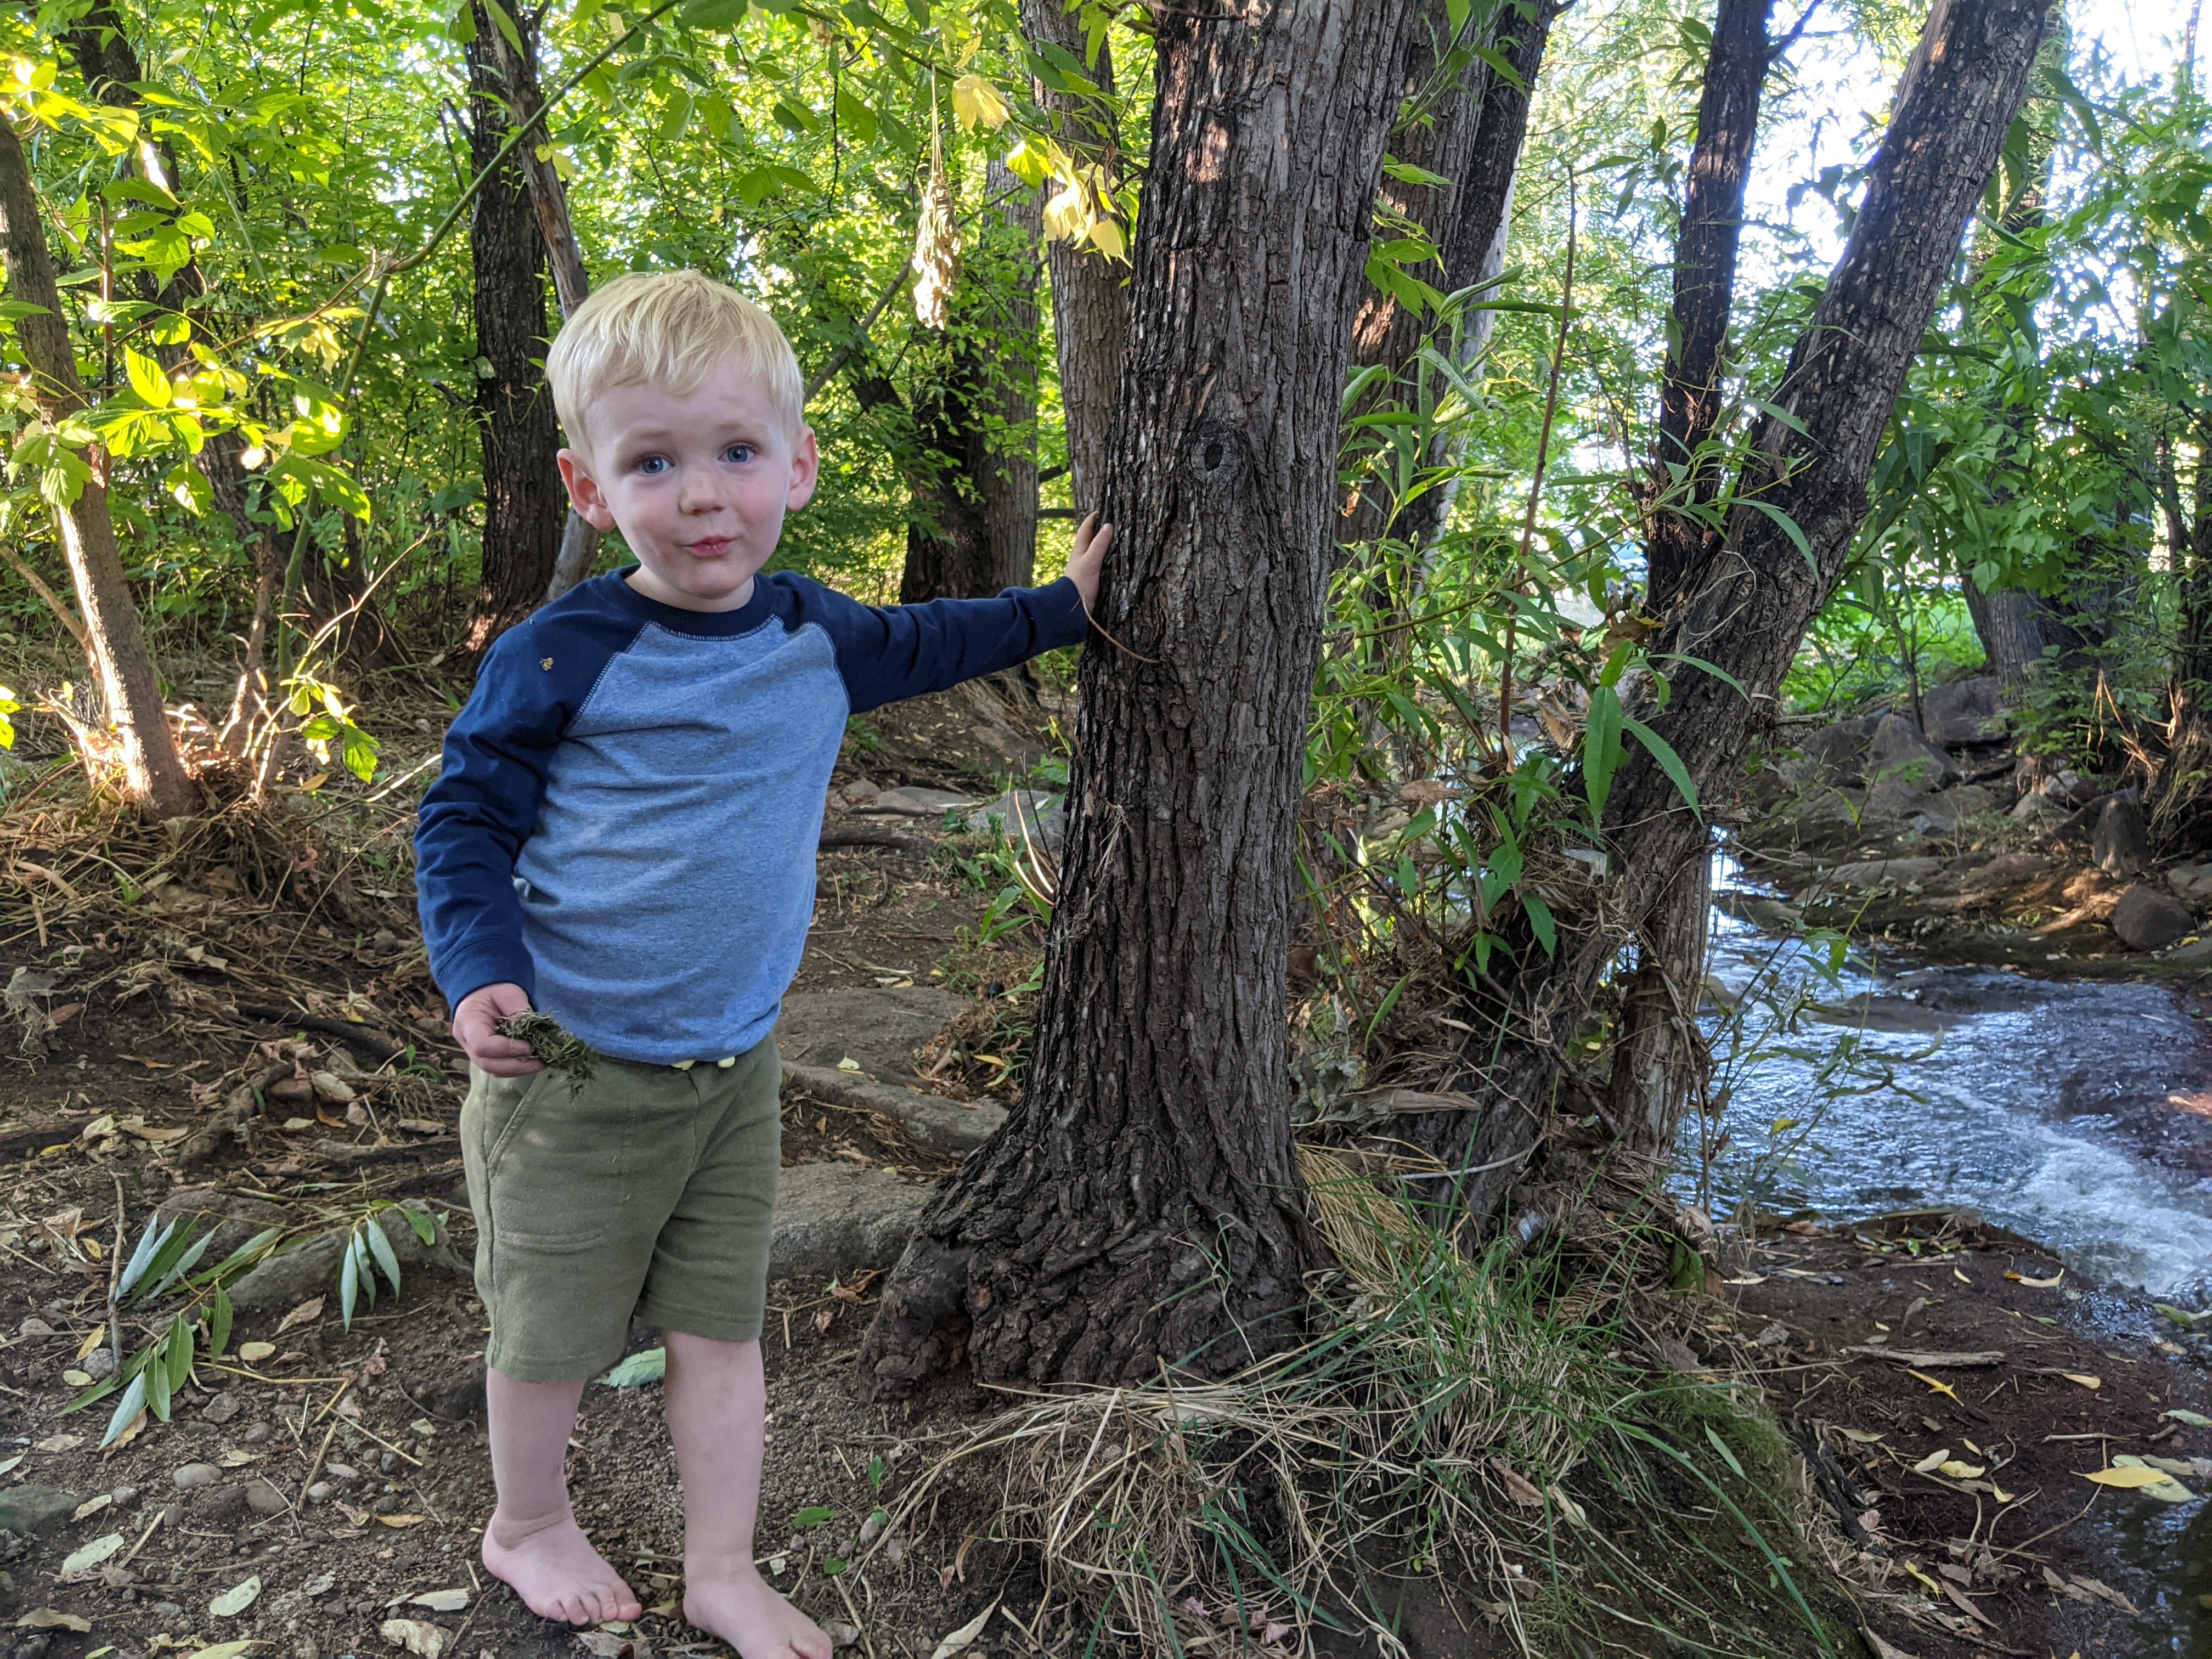 Owen leaning on a tree by the creek